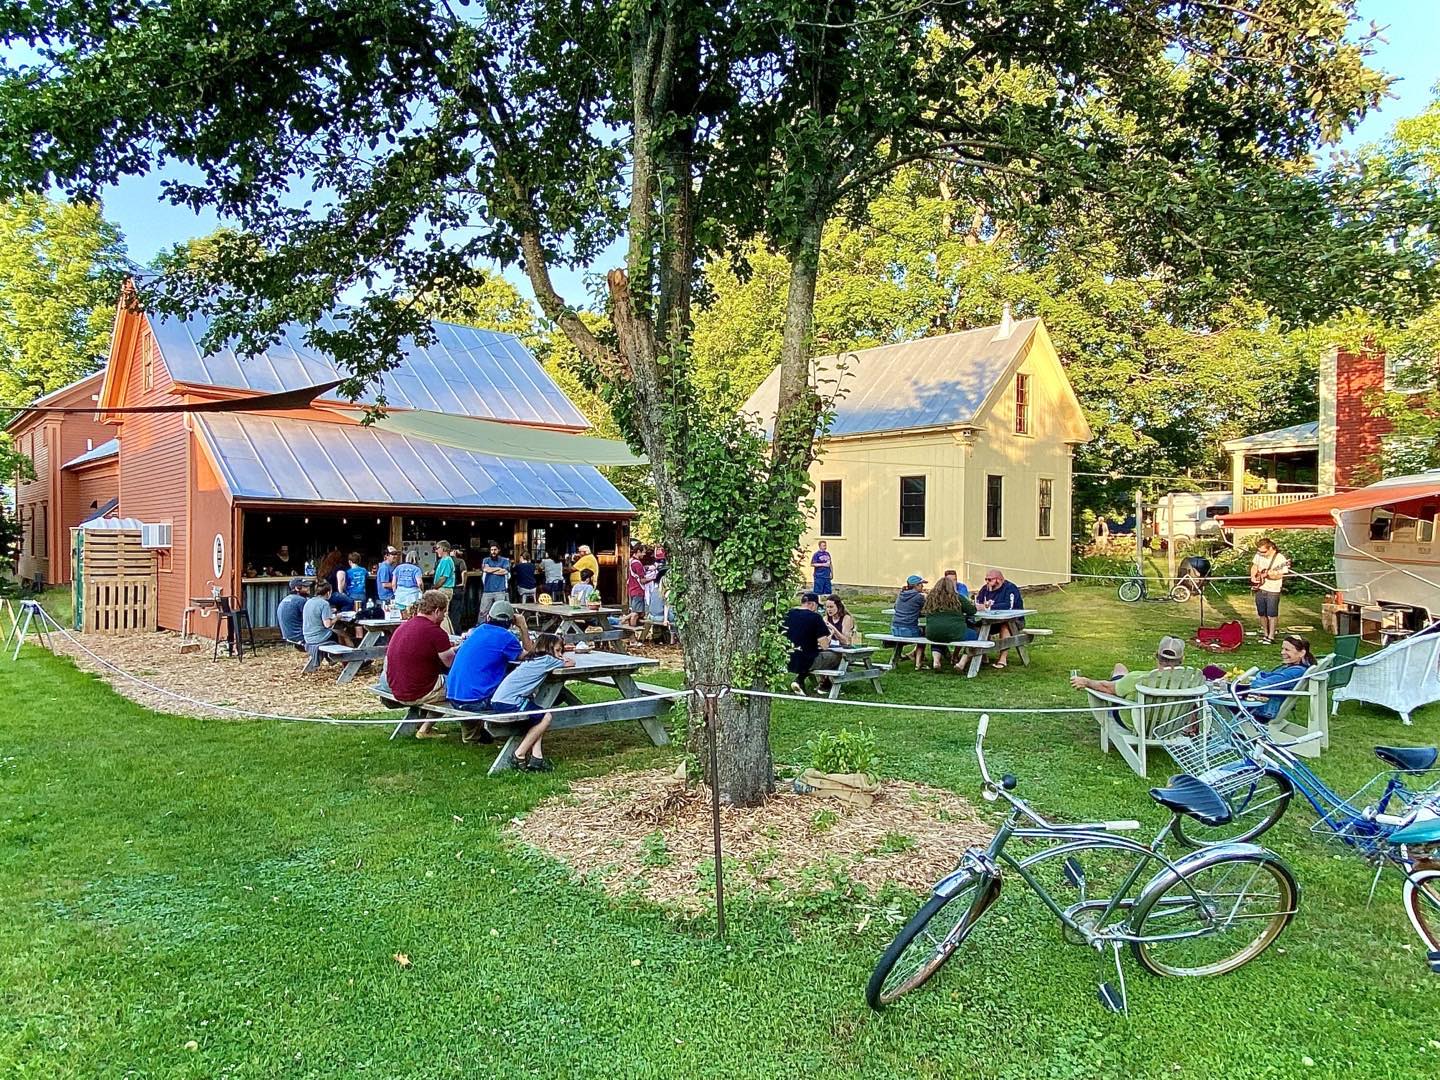 Saturday night at Rolling Fatties in Kingfield, Maine - photo by Cindy Orcutt. A beautiful evening after yesterday’s all-day rain. #rollingfatties #kingfieldmaine #orcuttphotography #summerevening